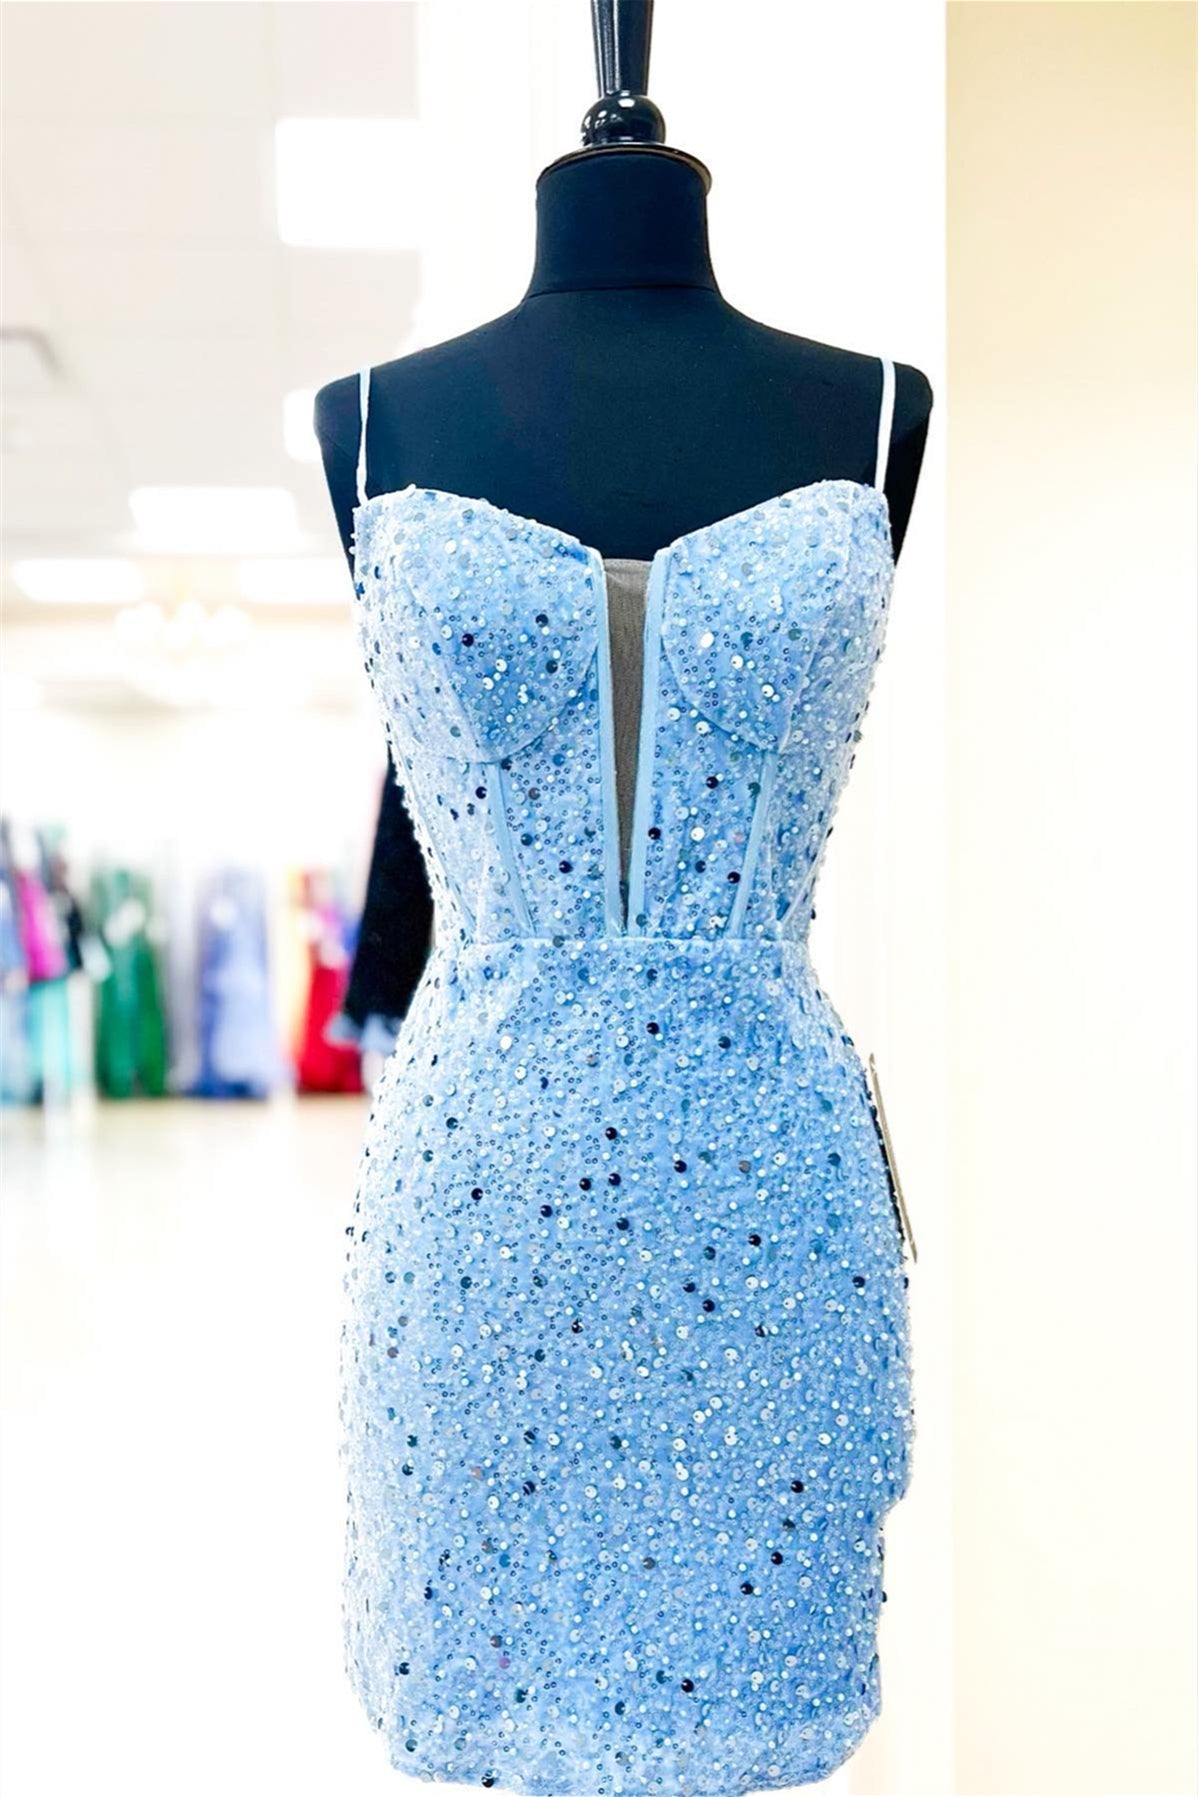 Light Blue Straps Sheath Beaded Sequined Corset Homecoming Dress outfit, Homecome Dresses Short Prom